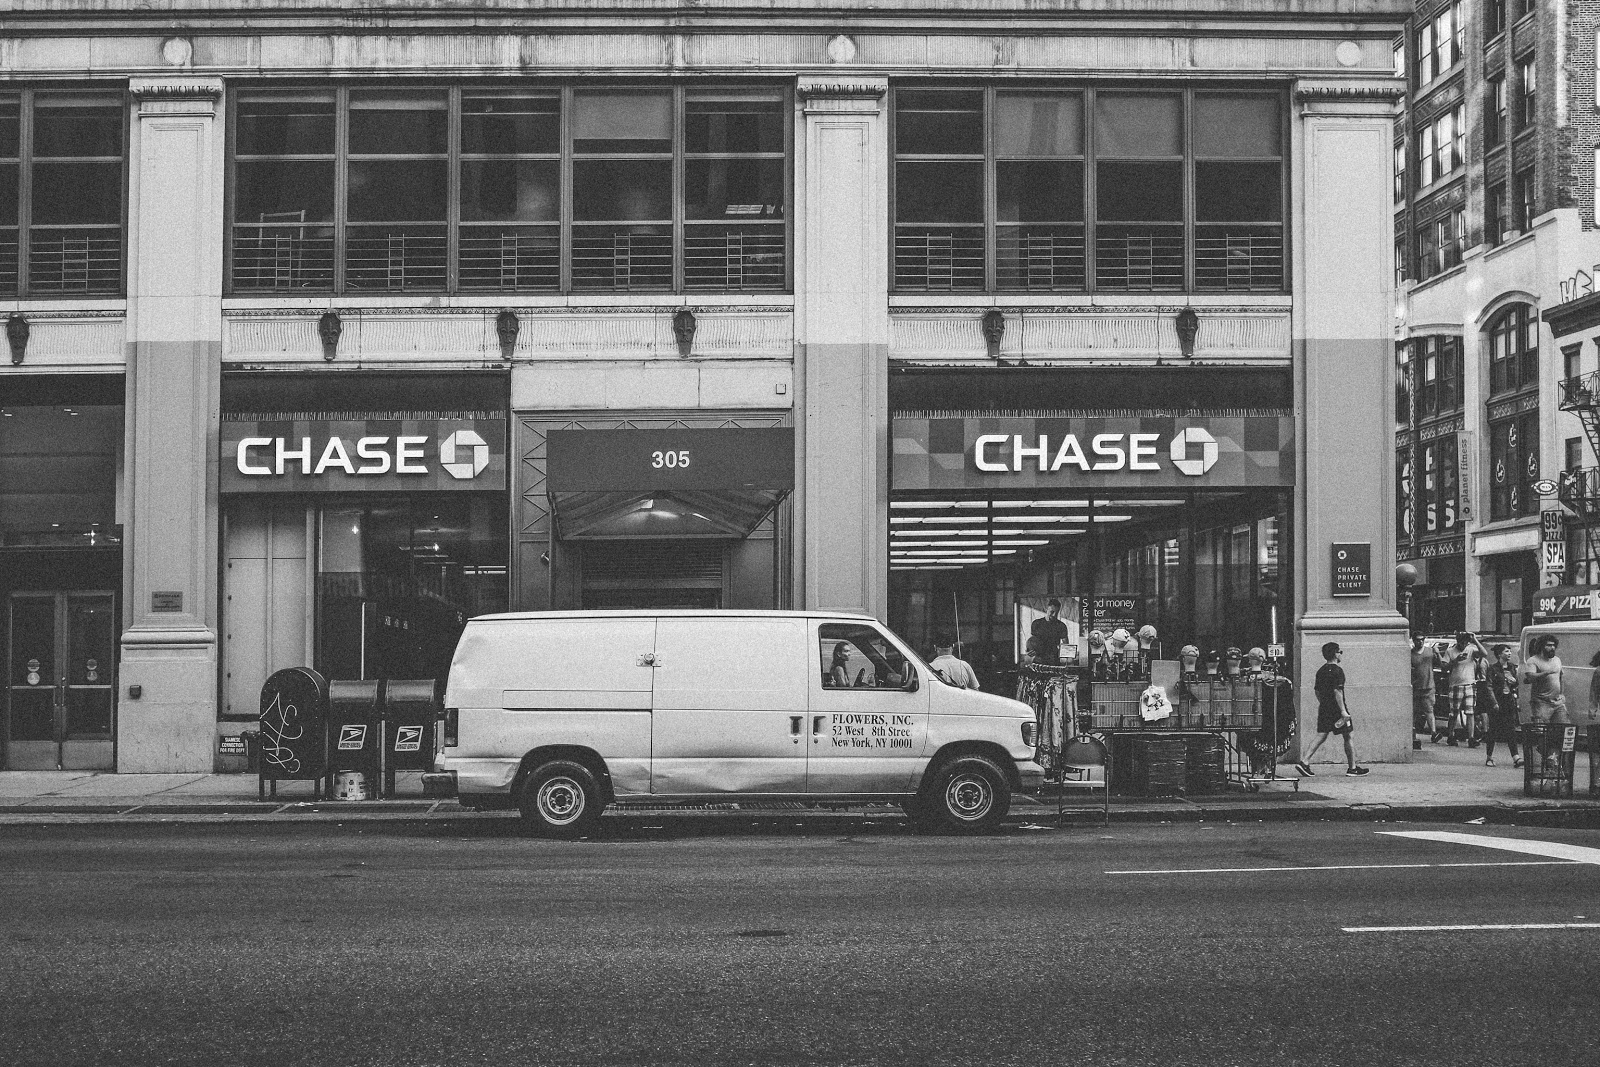 Chase retail bank on a main road with a white van parked outfront